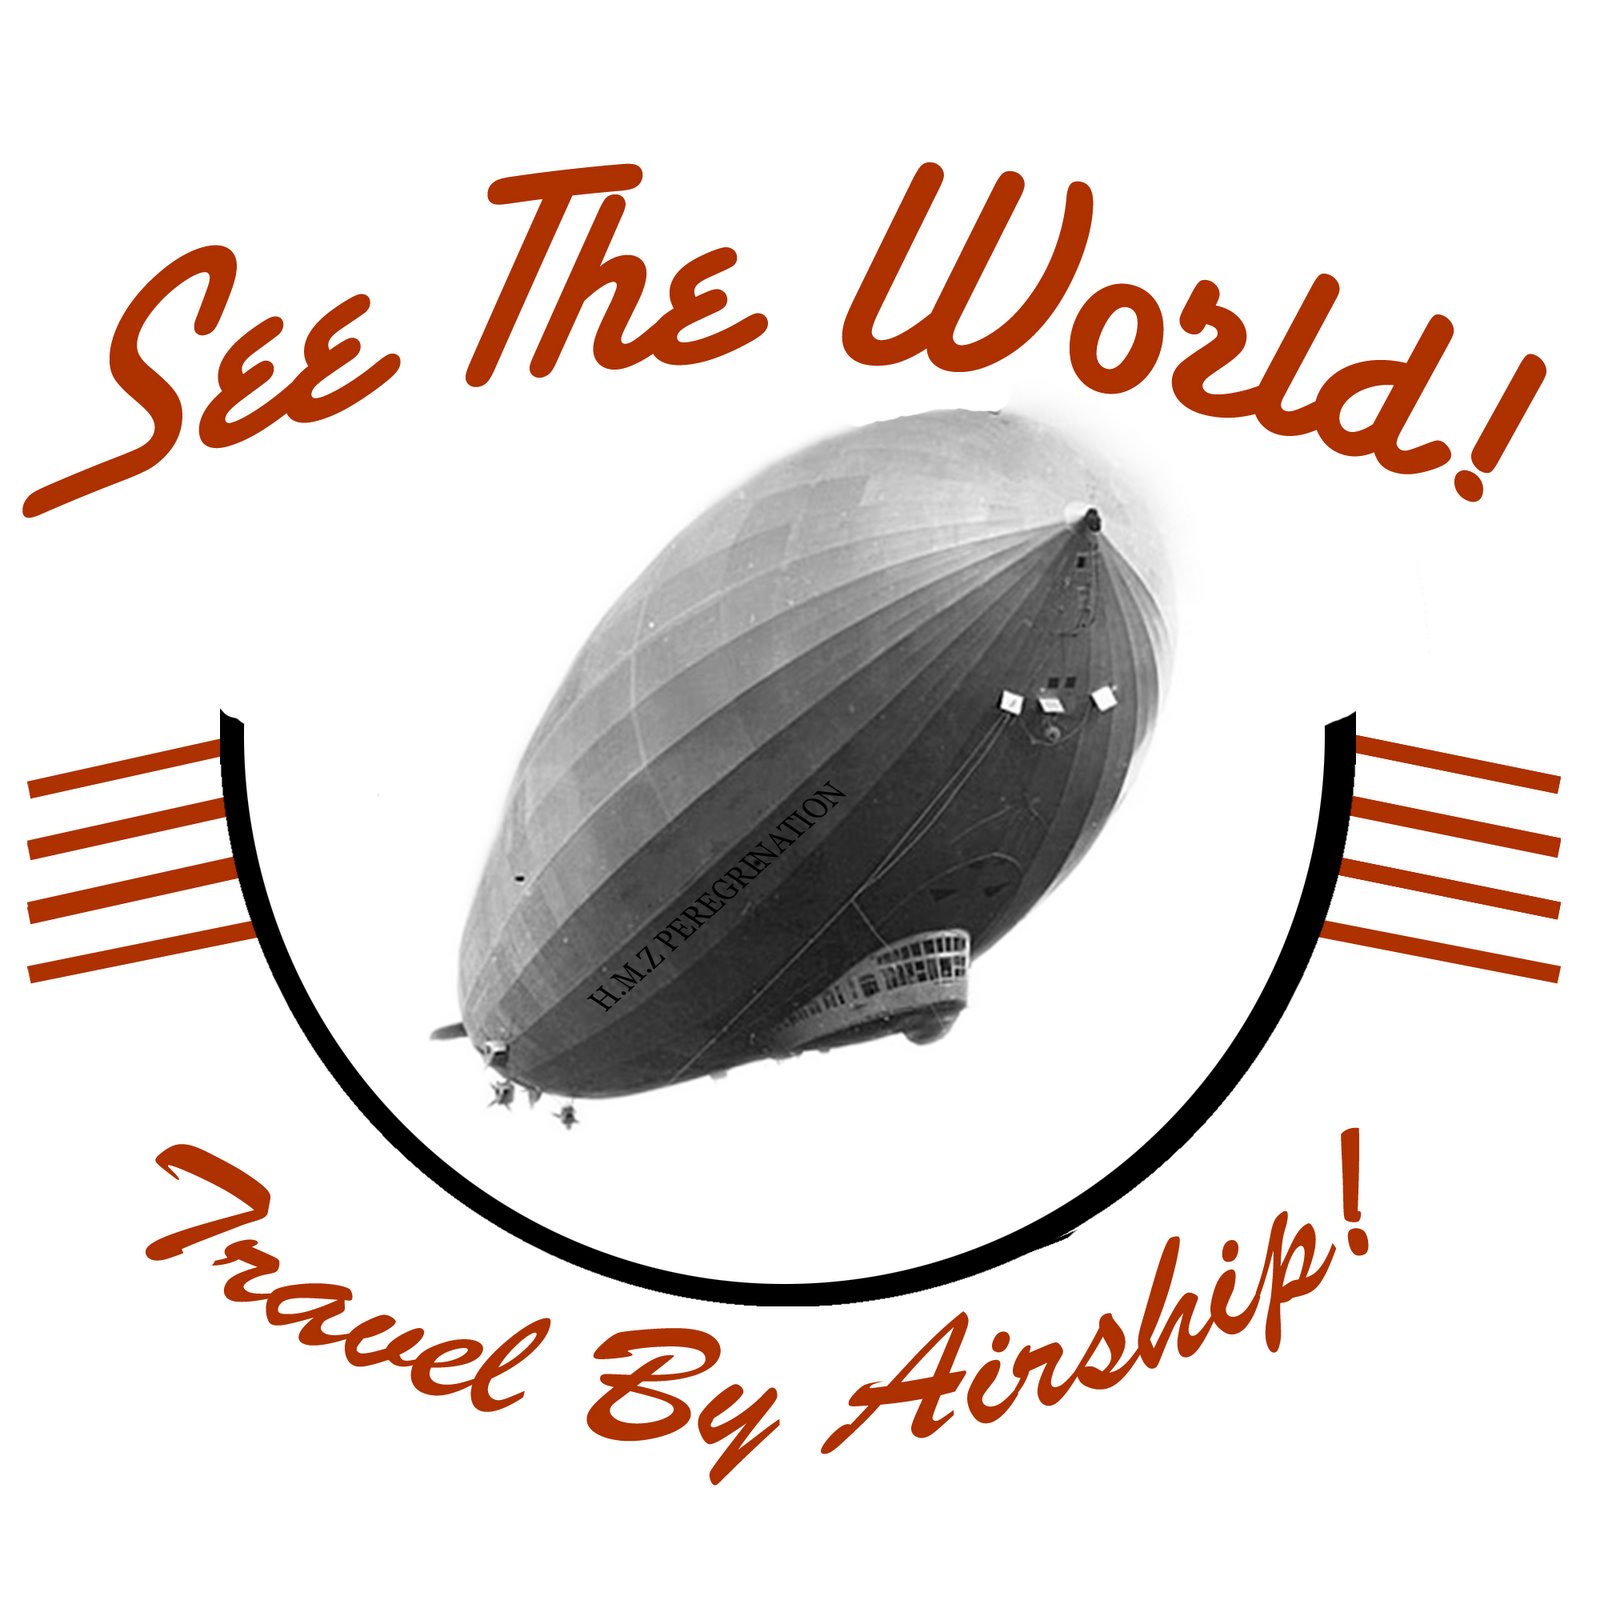 [see+the+world+badge.bmp]